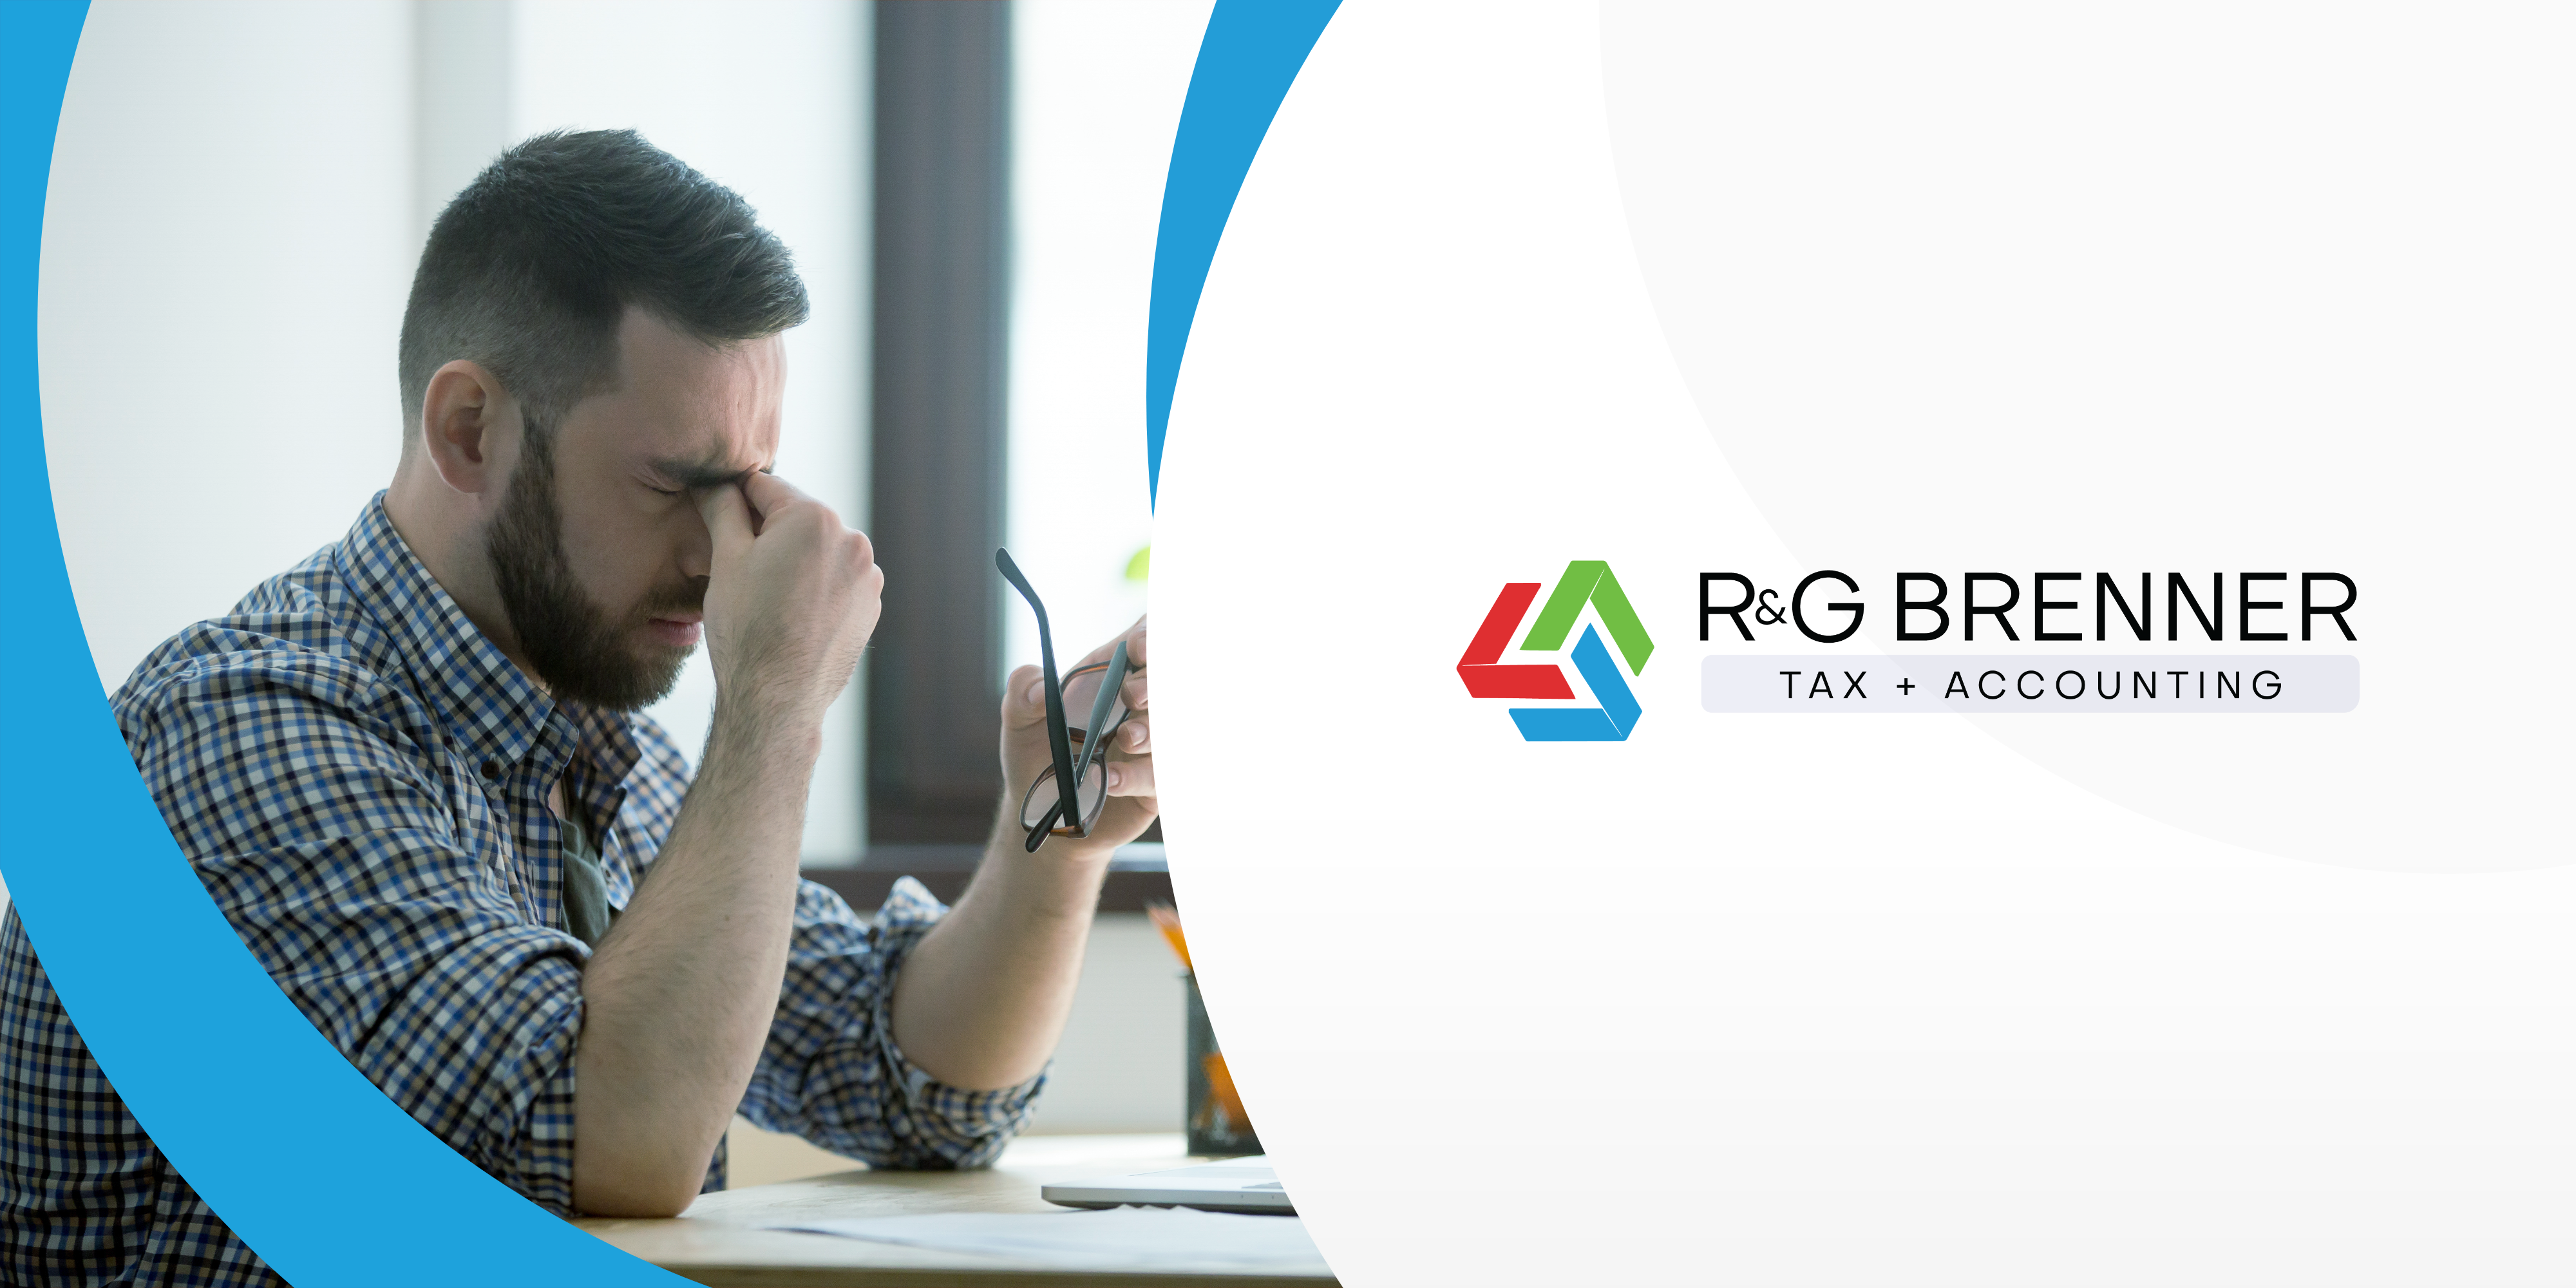 Image of man pinching his nose in frustration to the left. To the right is the logo of R&G Brenner on a white background.